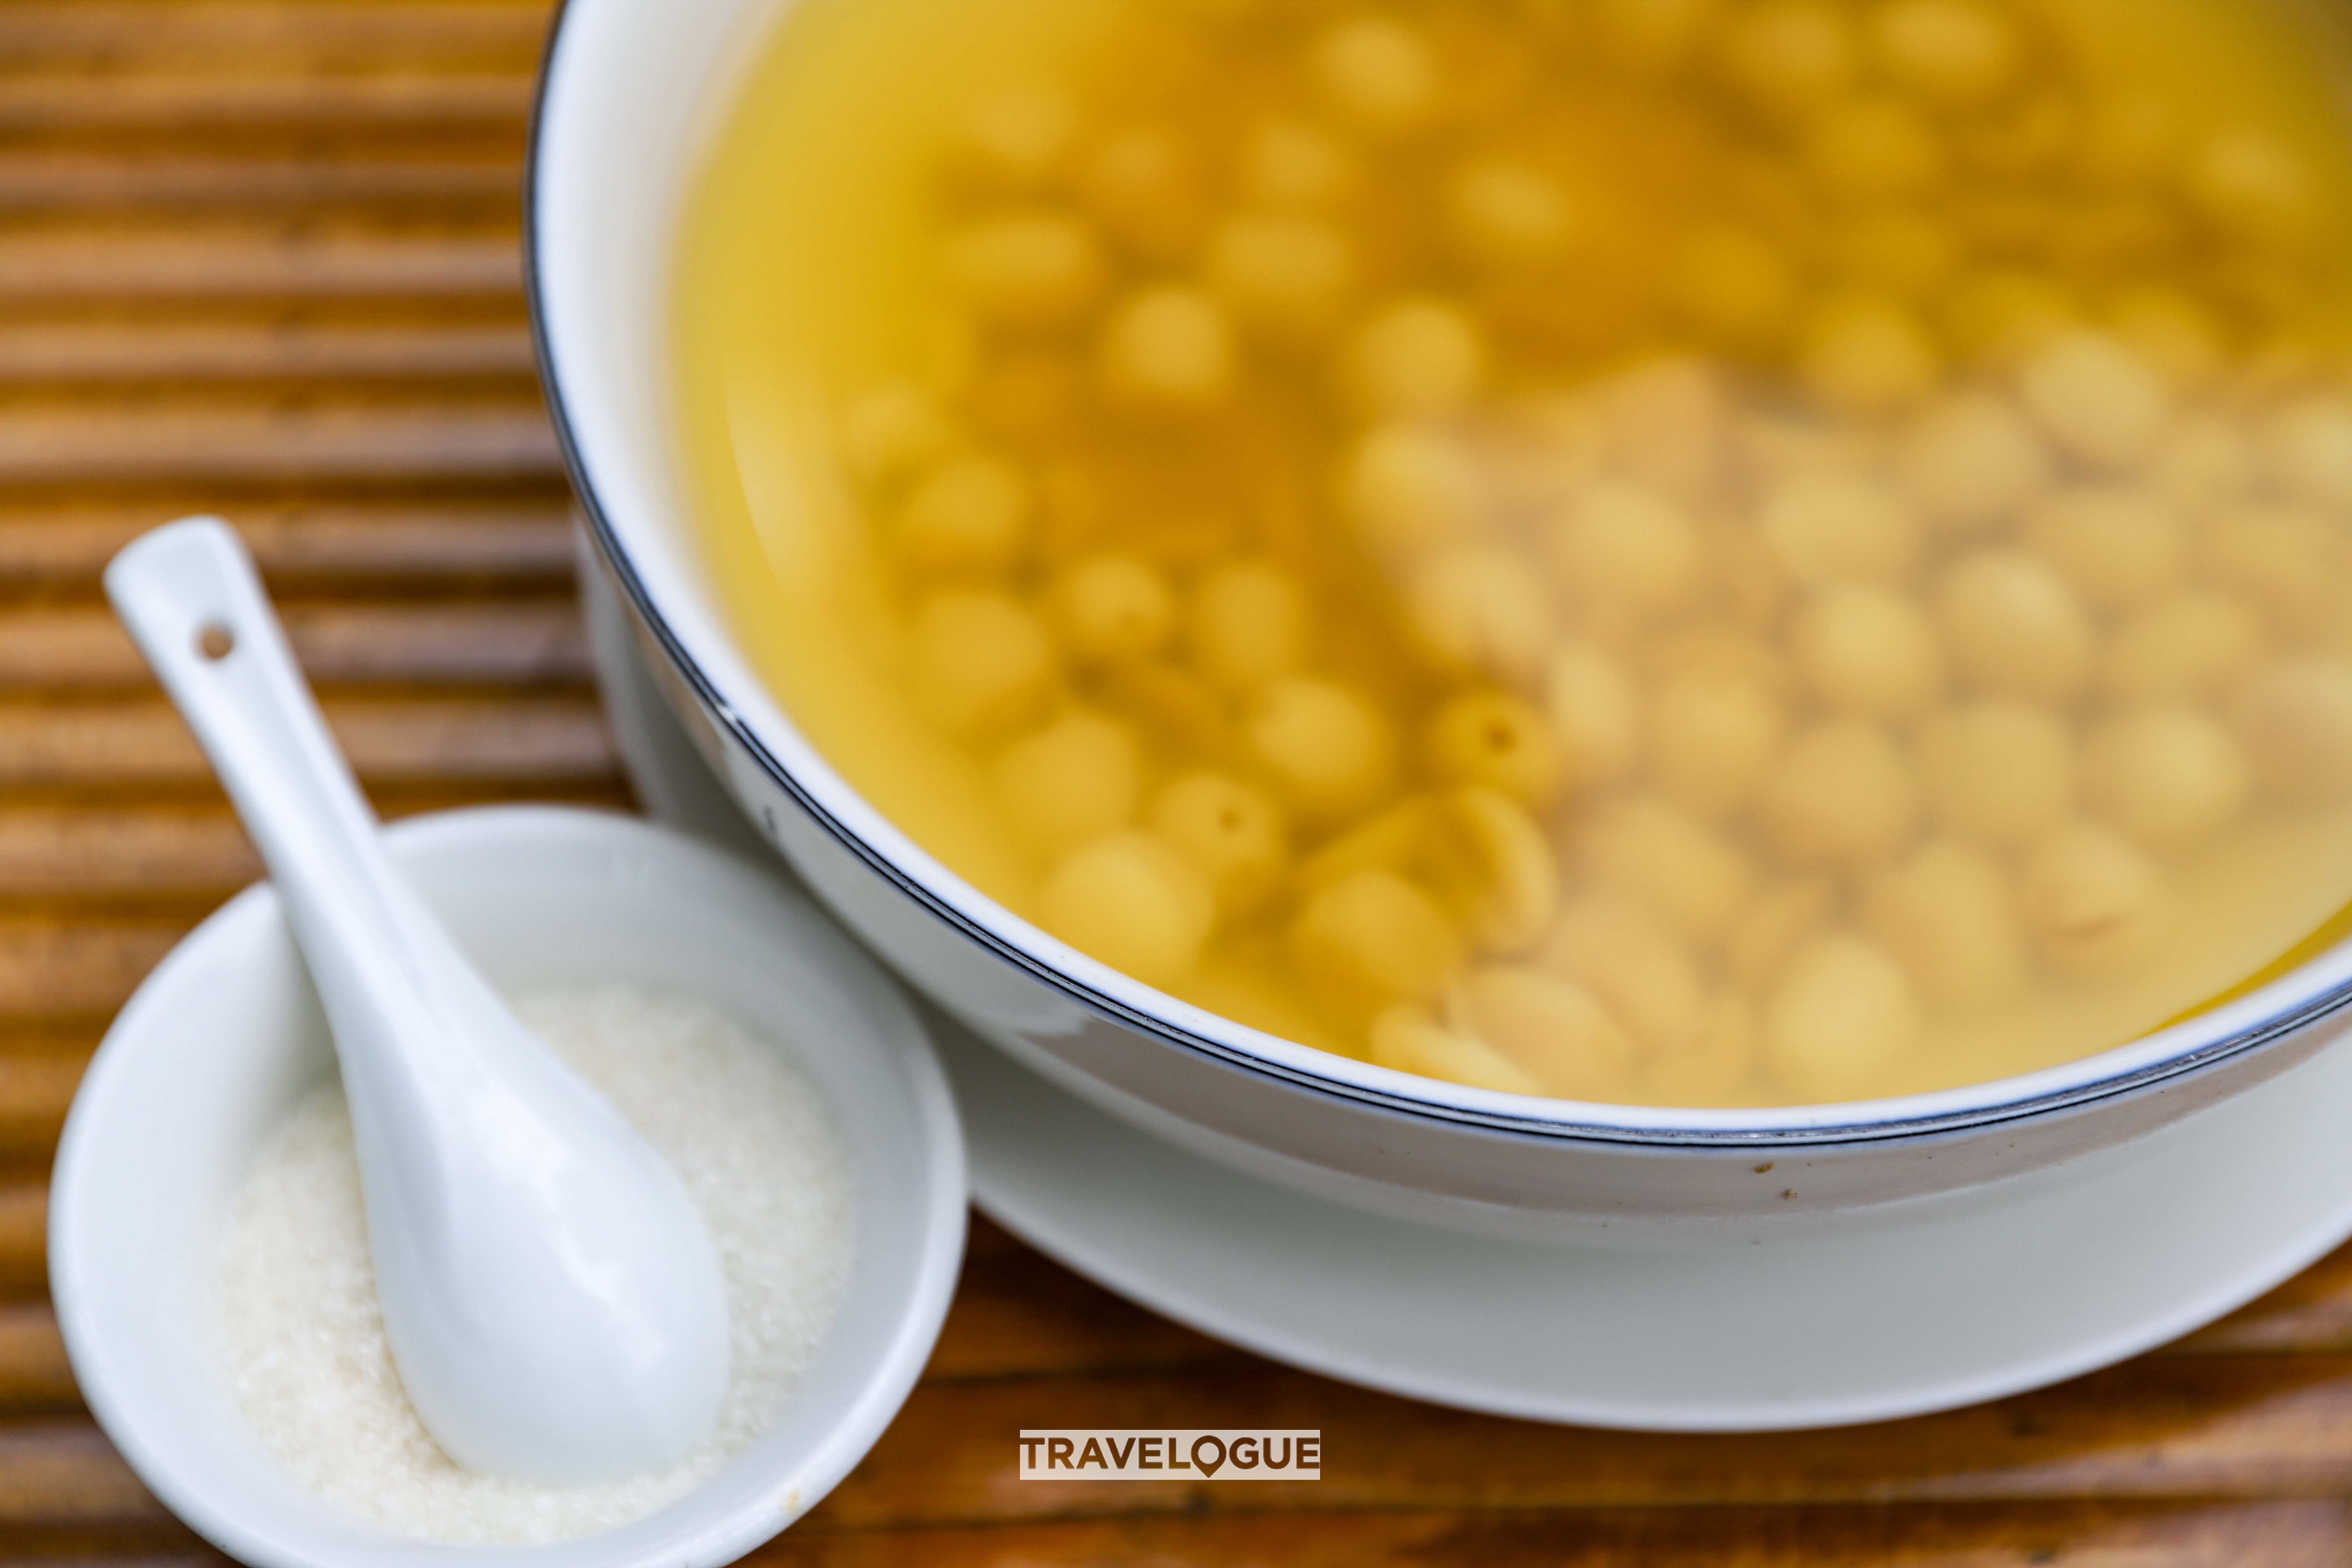 Sweet lotus seed soup, a famous dish of the Zhu Xi family banquet, is served to the table. /CGTN